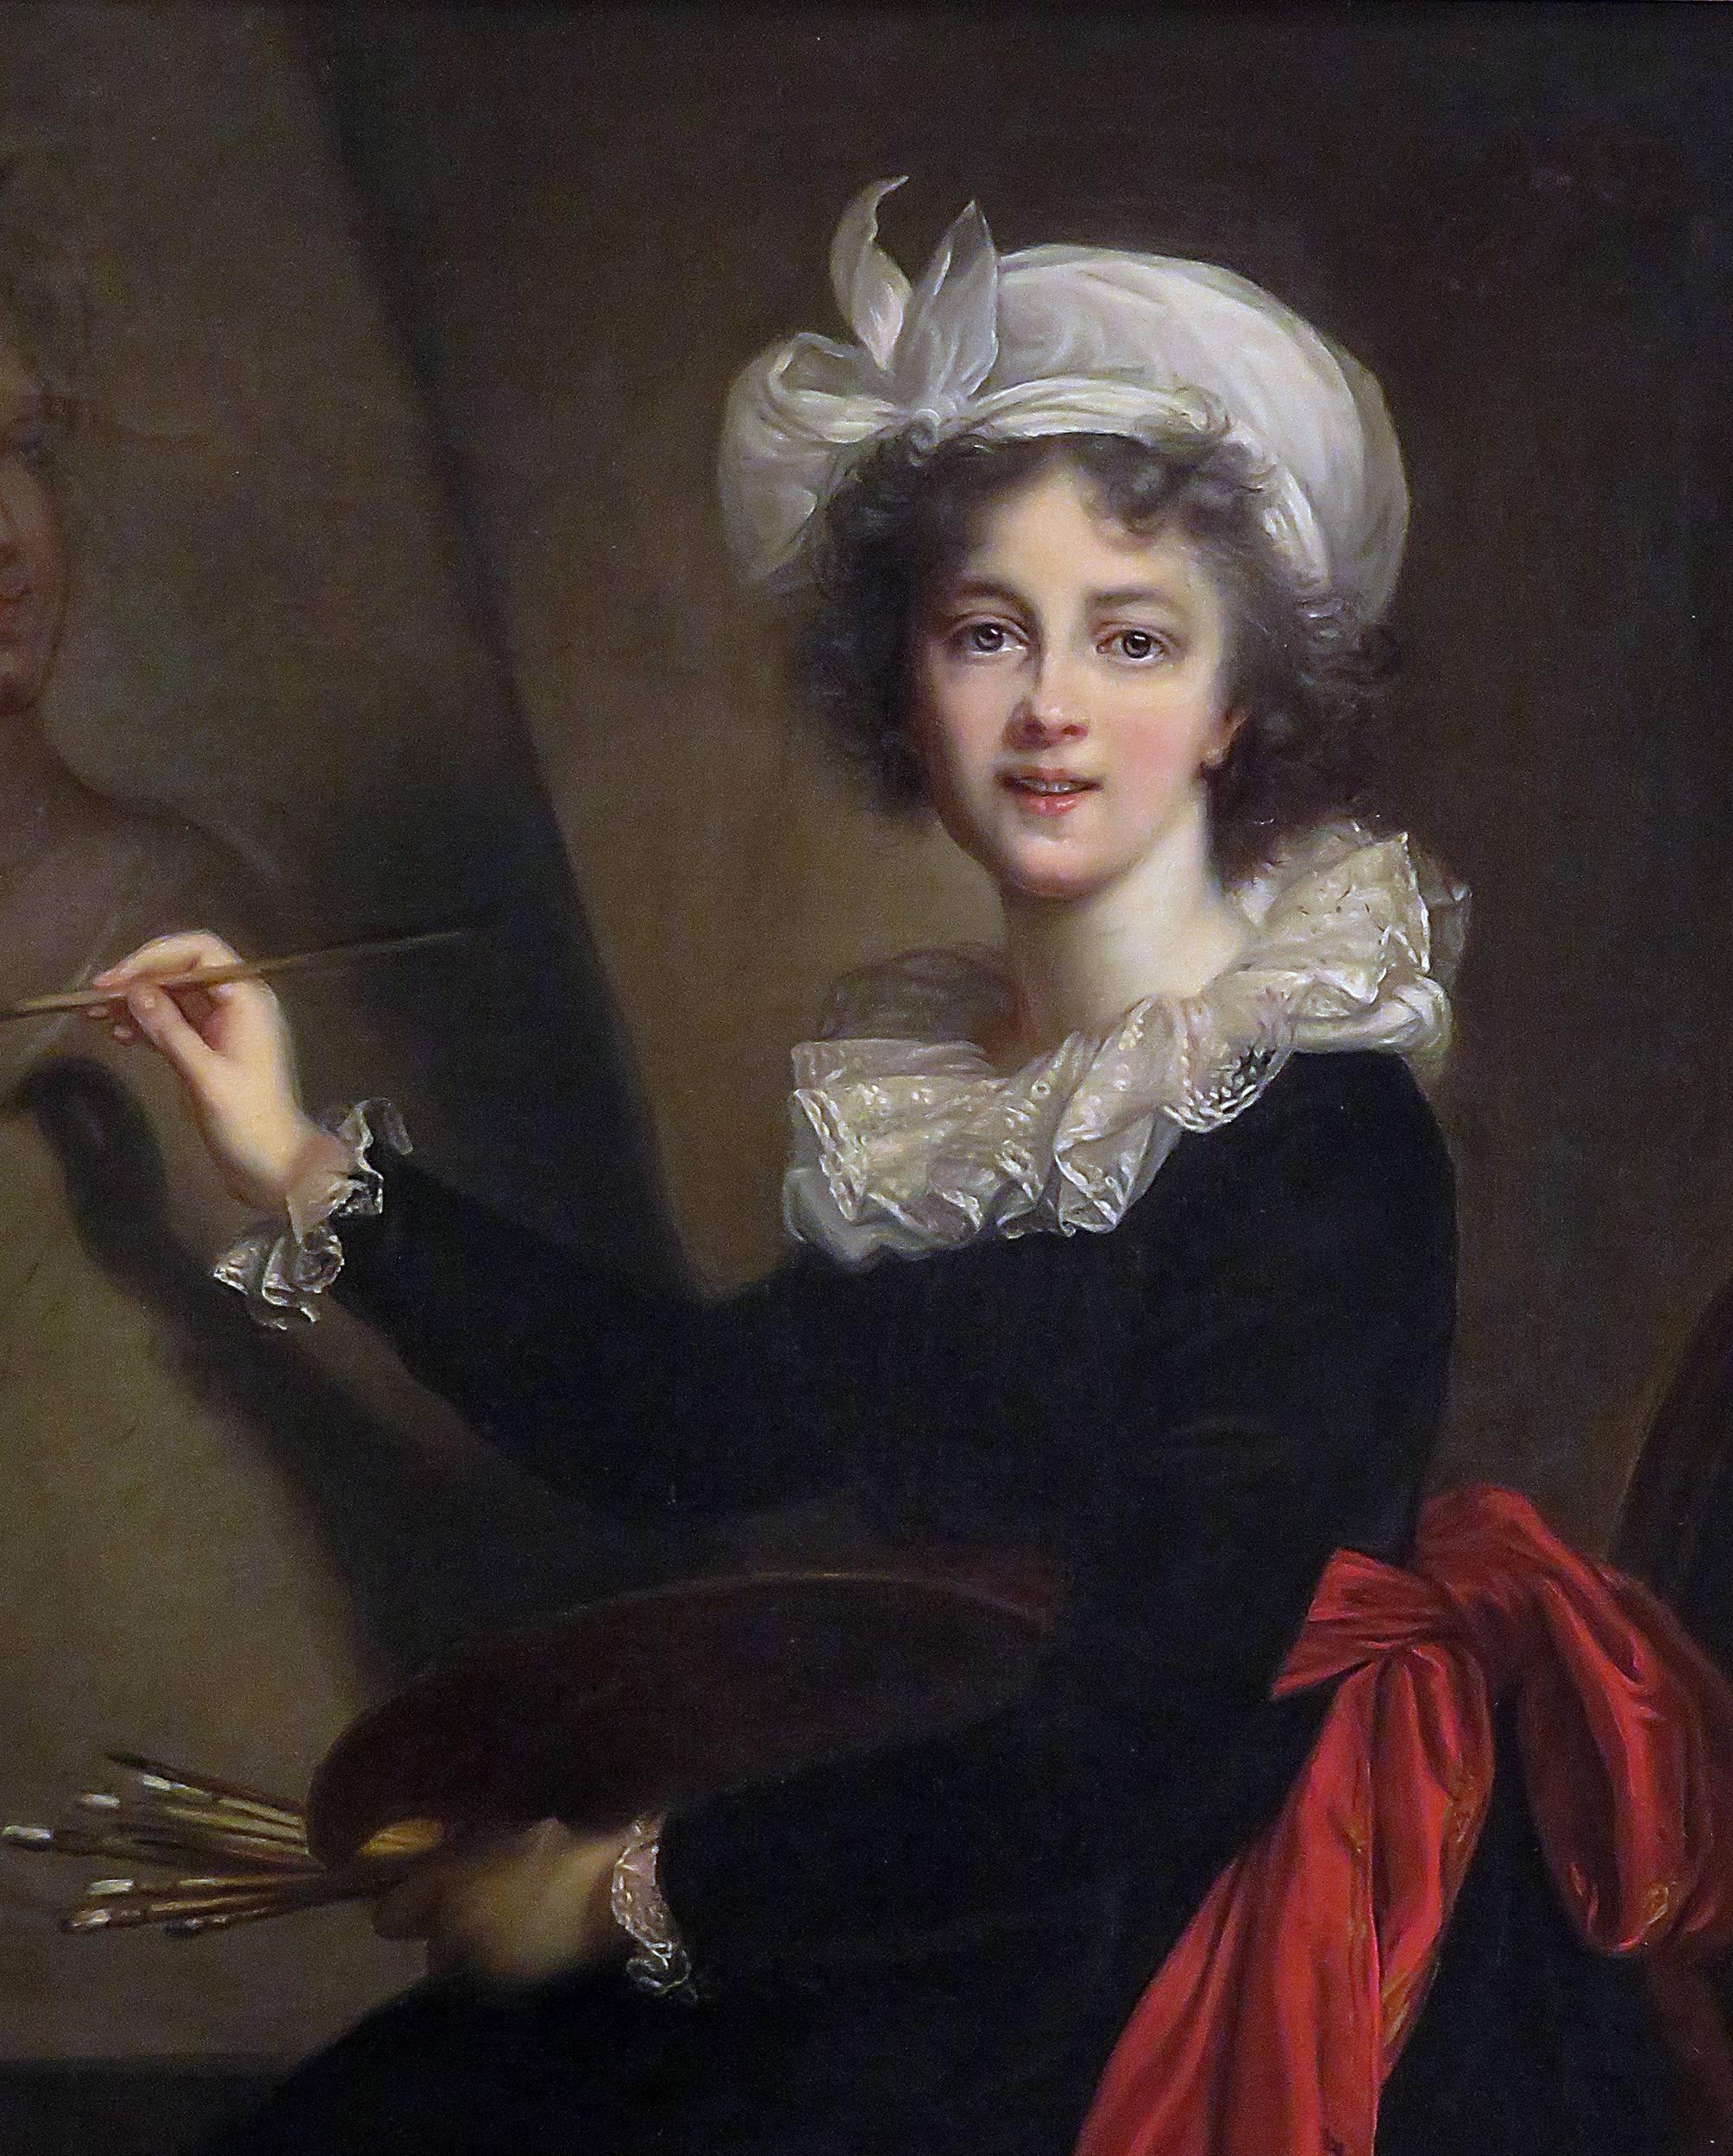 Vigee Lebrun born in 1755 was a court painter for Marie Antoinette. Her paintings are prized for their realism and warmth. She has left an authenticated catalog of about 860 works. It was common for artists to actually produce an sell copies of